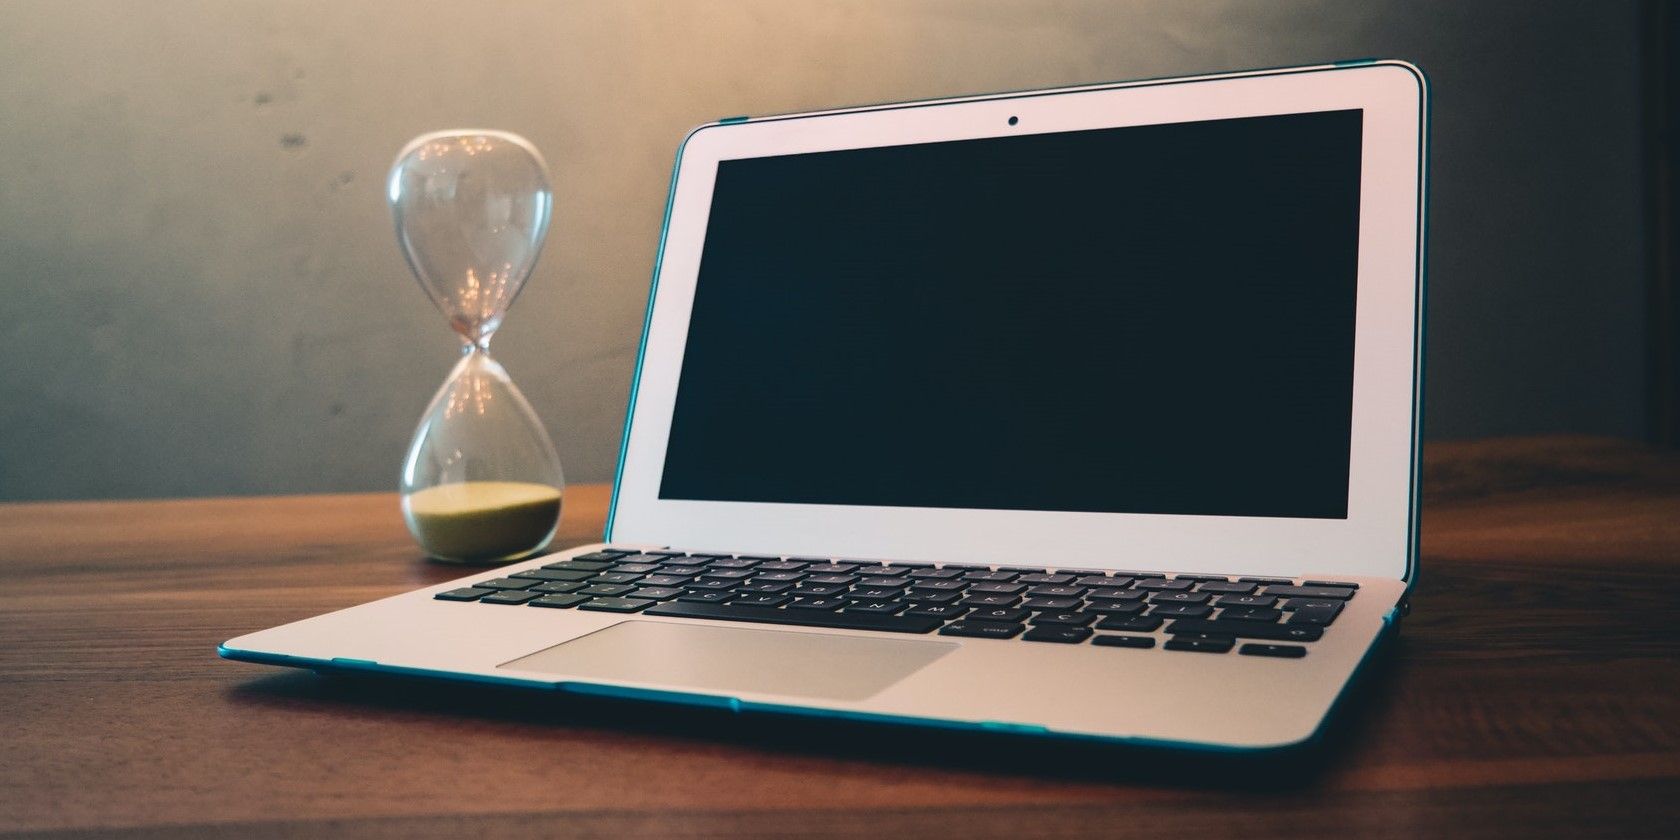 hourglass and laptop on a desk